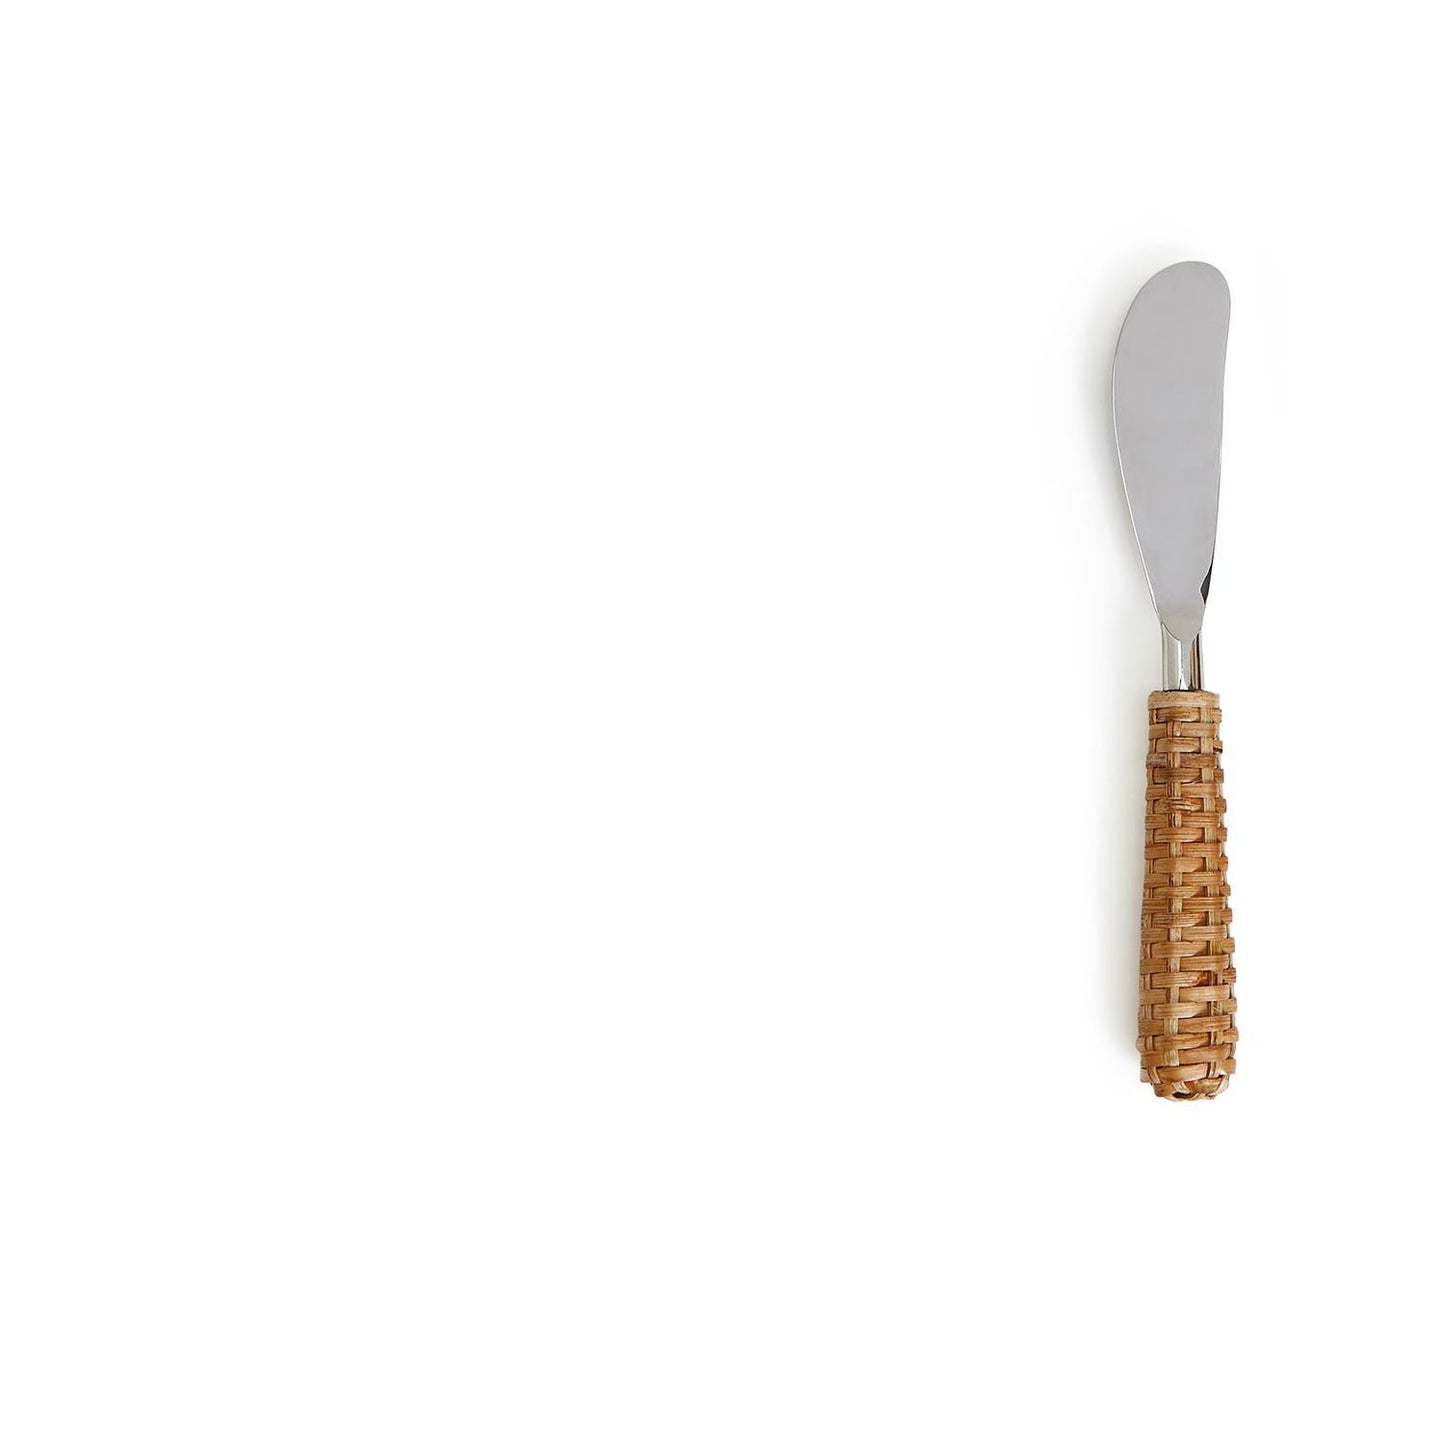 Basket Weave Cheese Knives